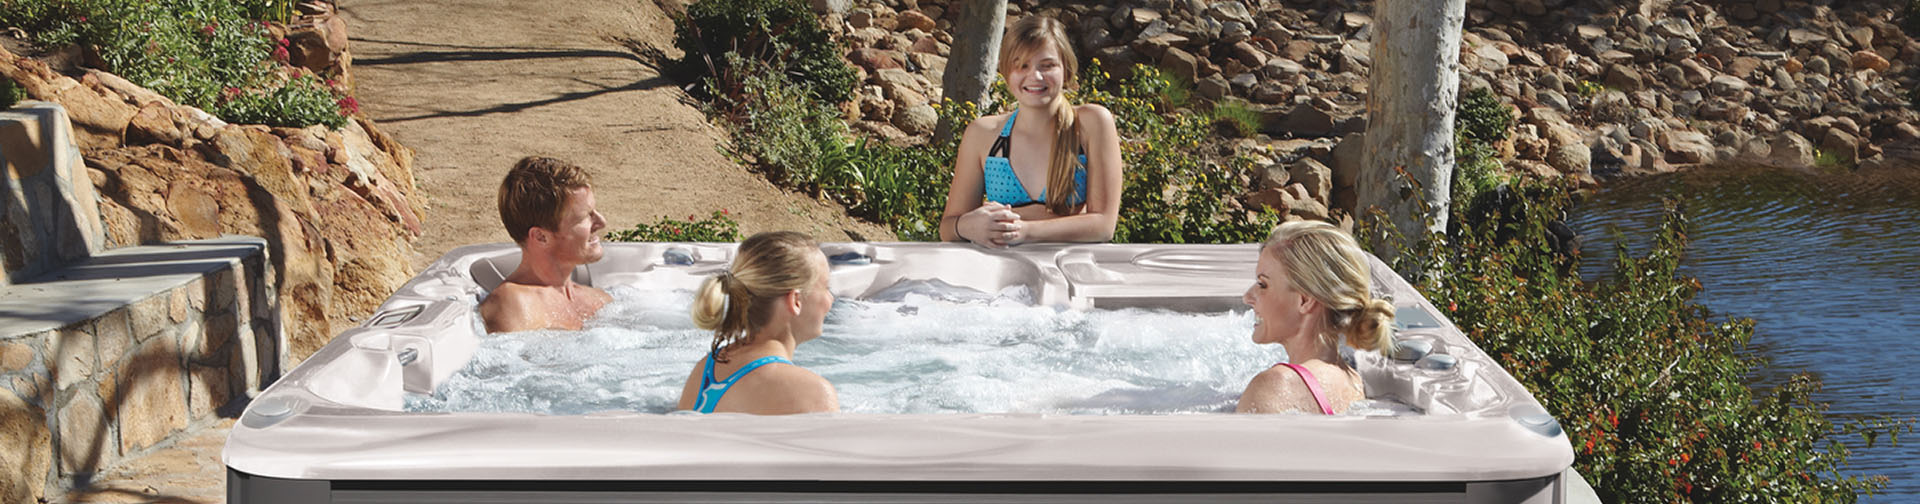 How to Keep Your Hot Tub Clean and Safe